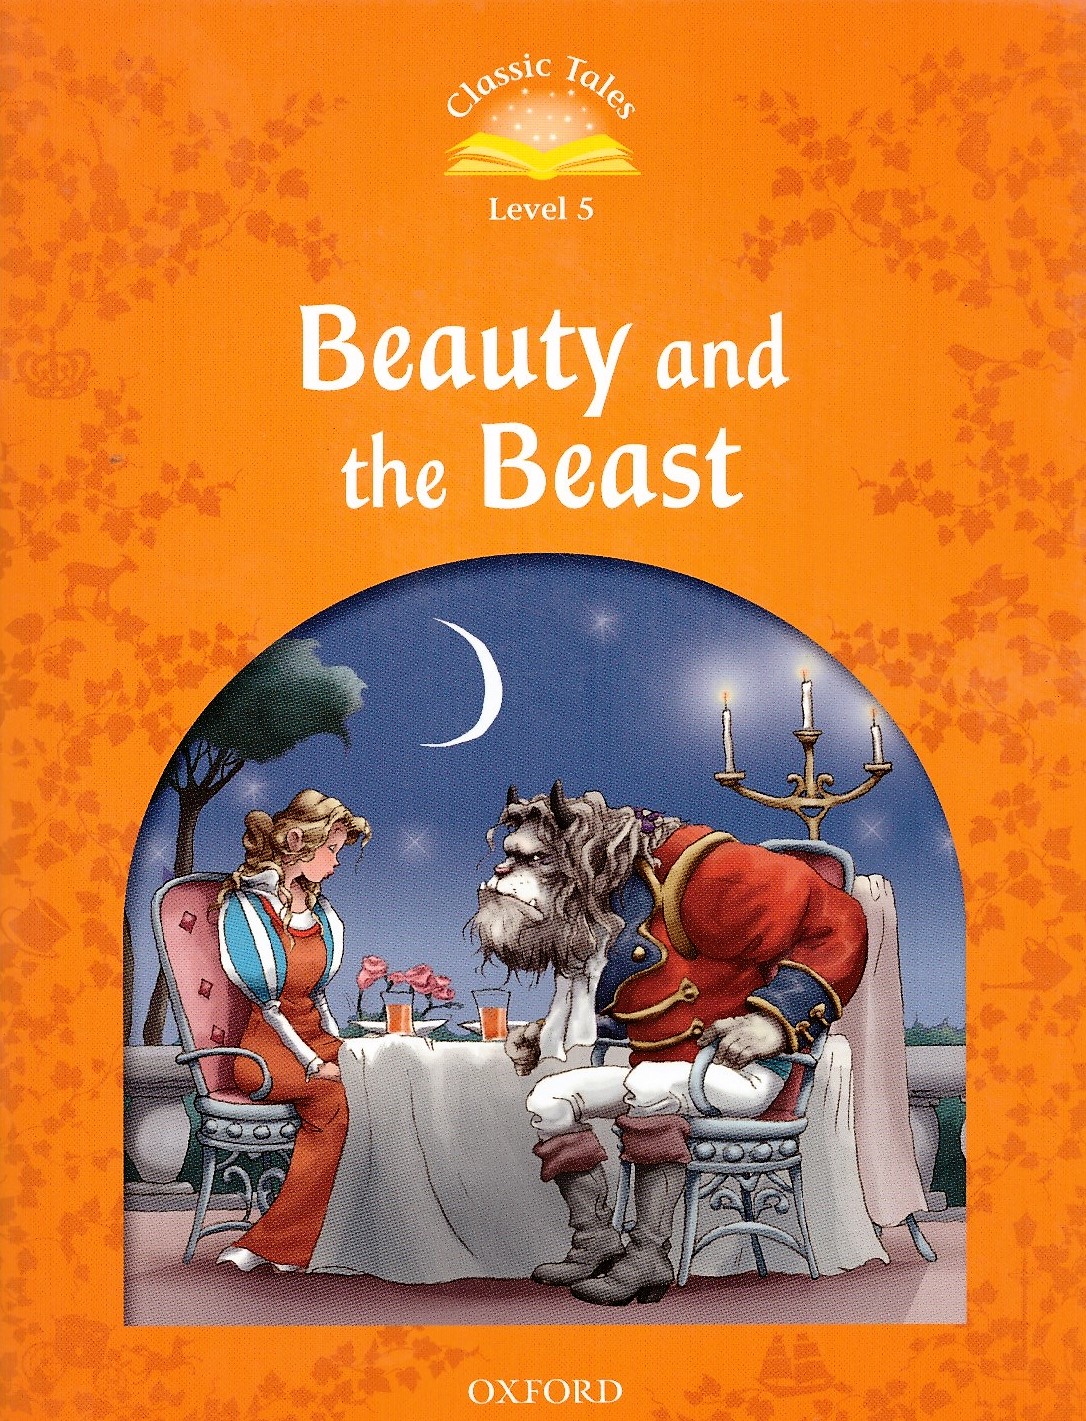 Oxford Classic Tales: Beauty and the Beast + Audio